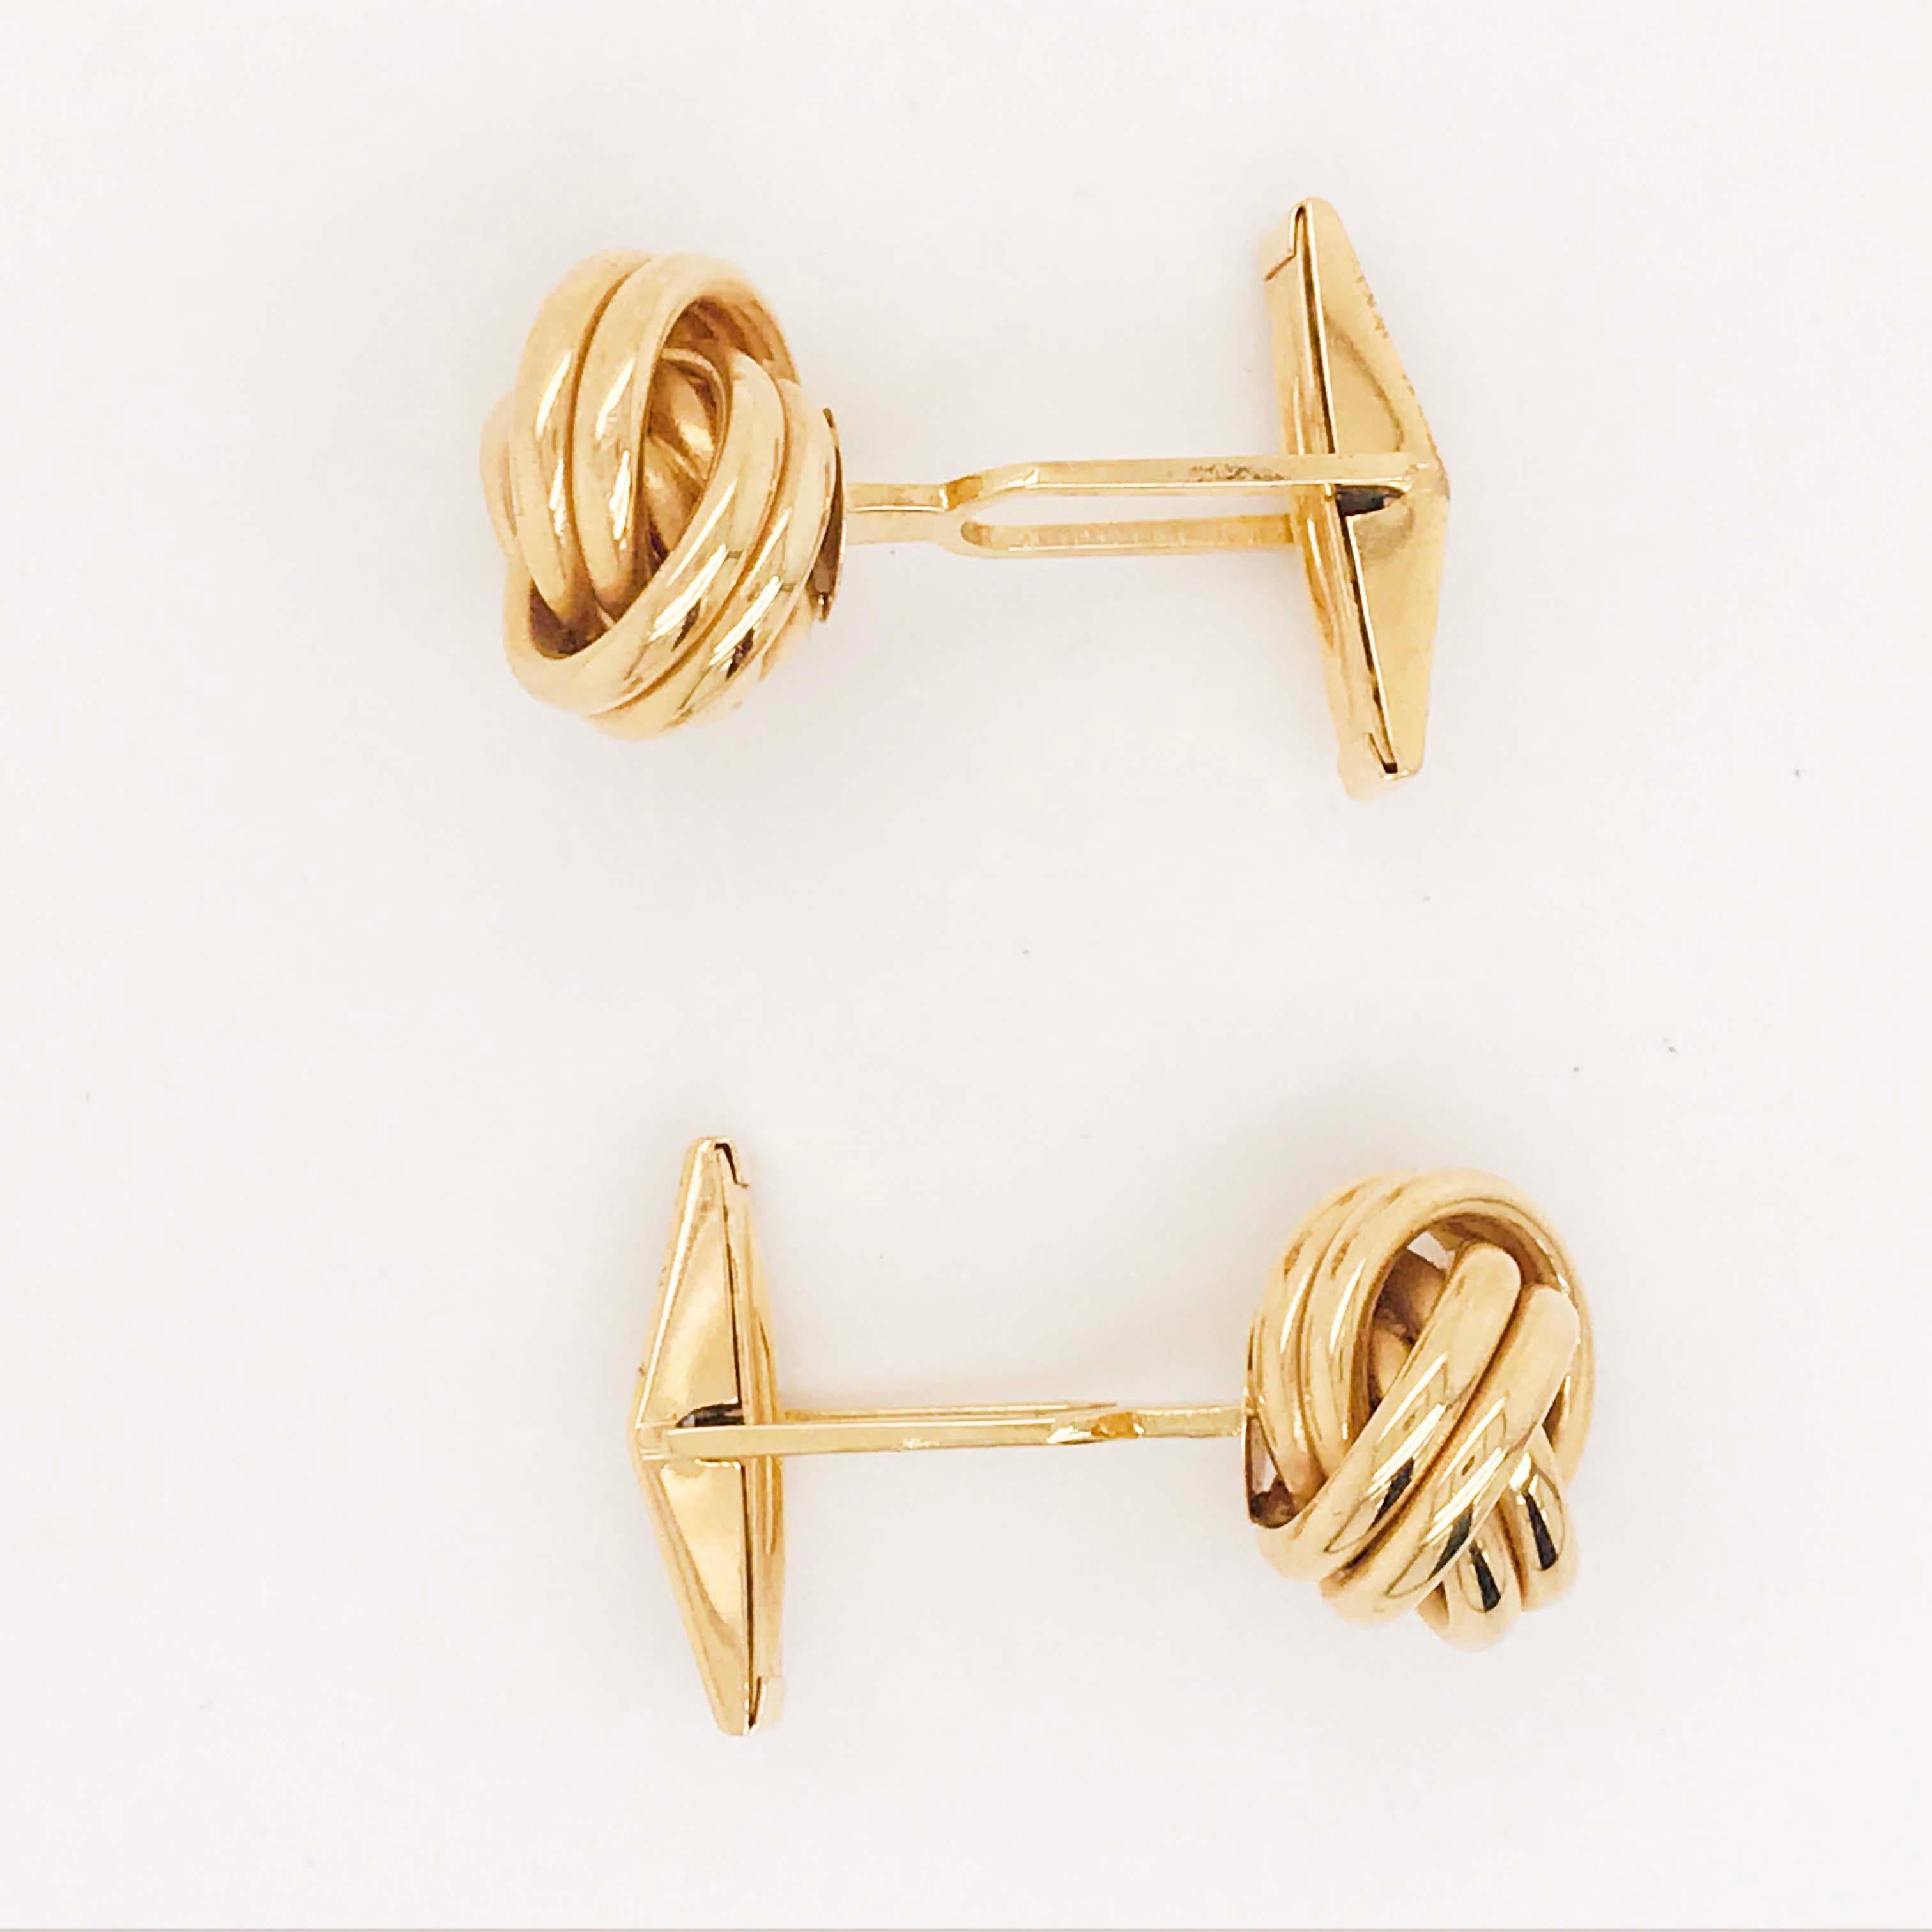 Gold Love Knot Cufflinks, 14K Yellow Gold Men's High Polish Love Knot Cufflinks In New Condition For Sale In Austin, TX